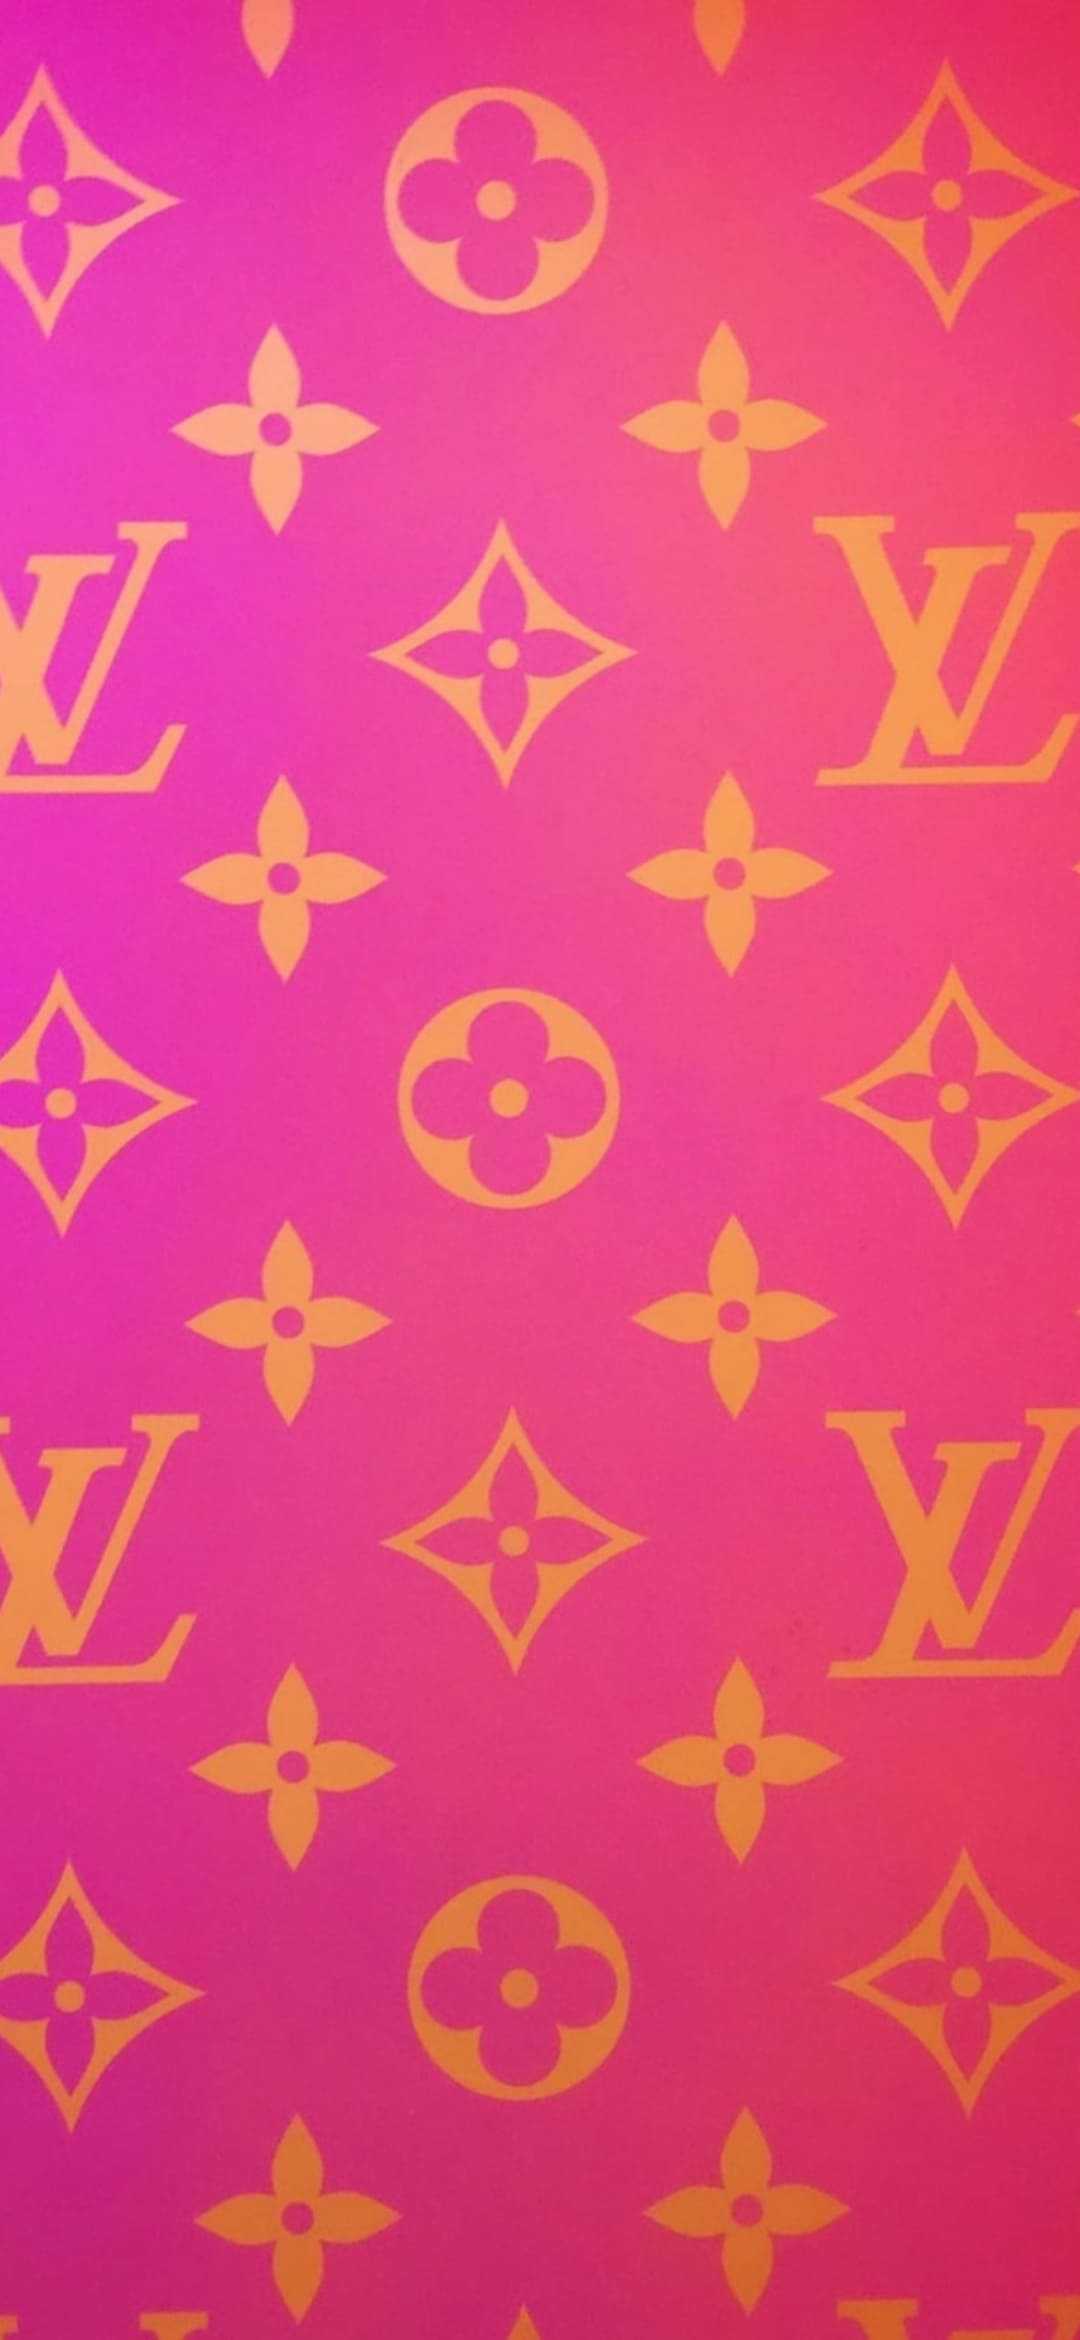 Download Louis Vuitton Wallpaper In Pink And White Wallpaper